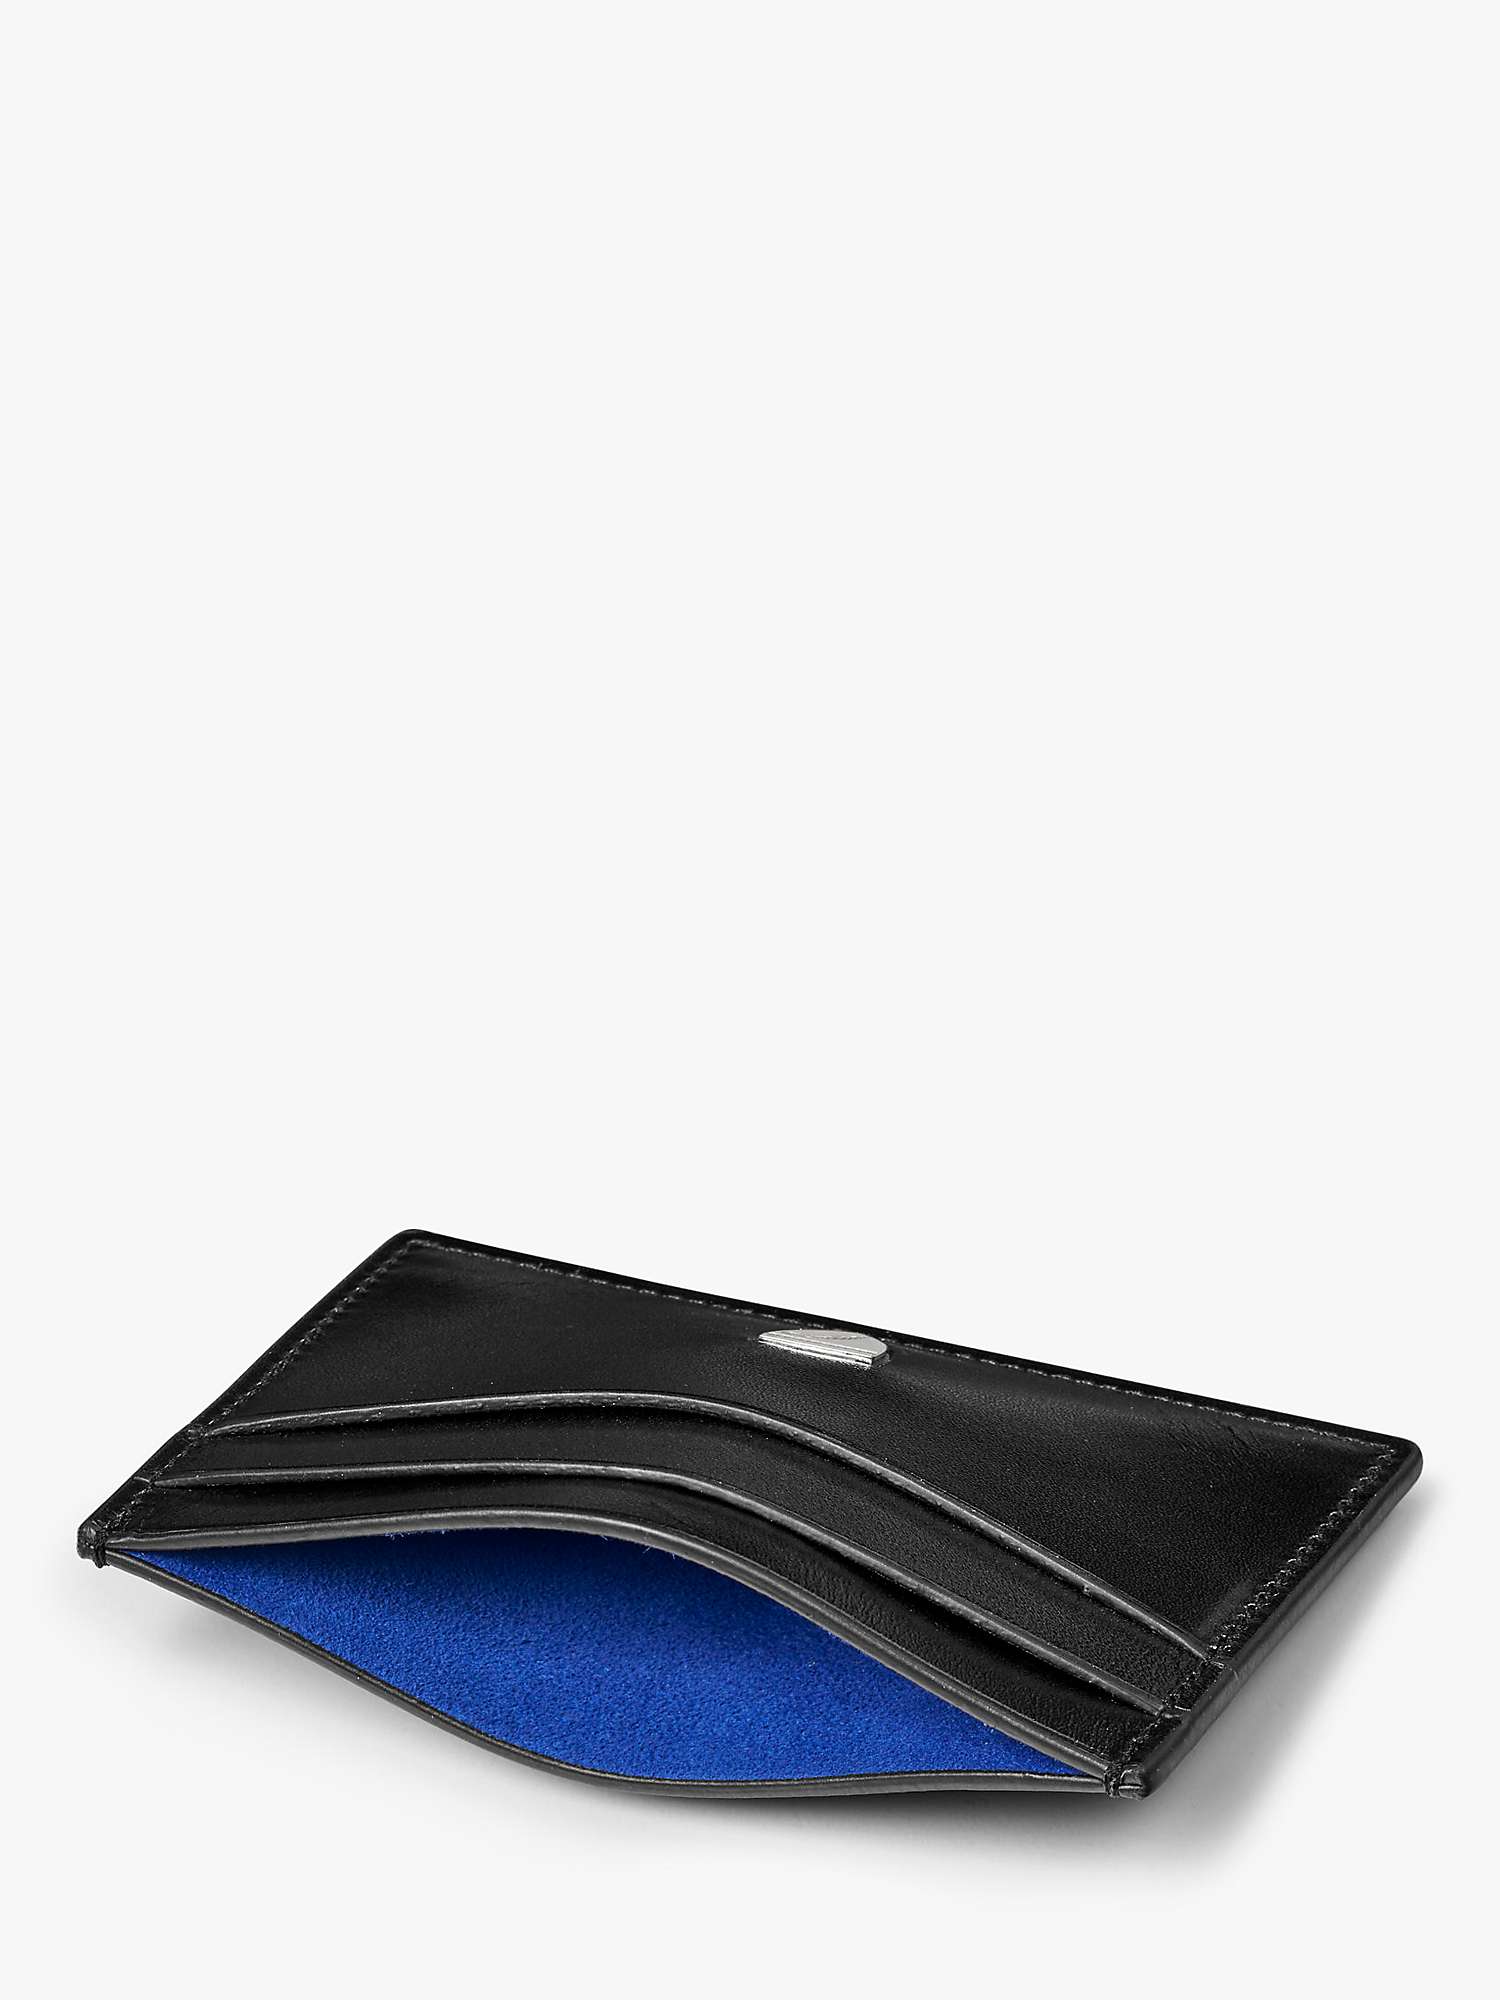 Buy Aspinal of London Smooth Leather Slim Credit Card Case Online at johnlewis.com